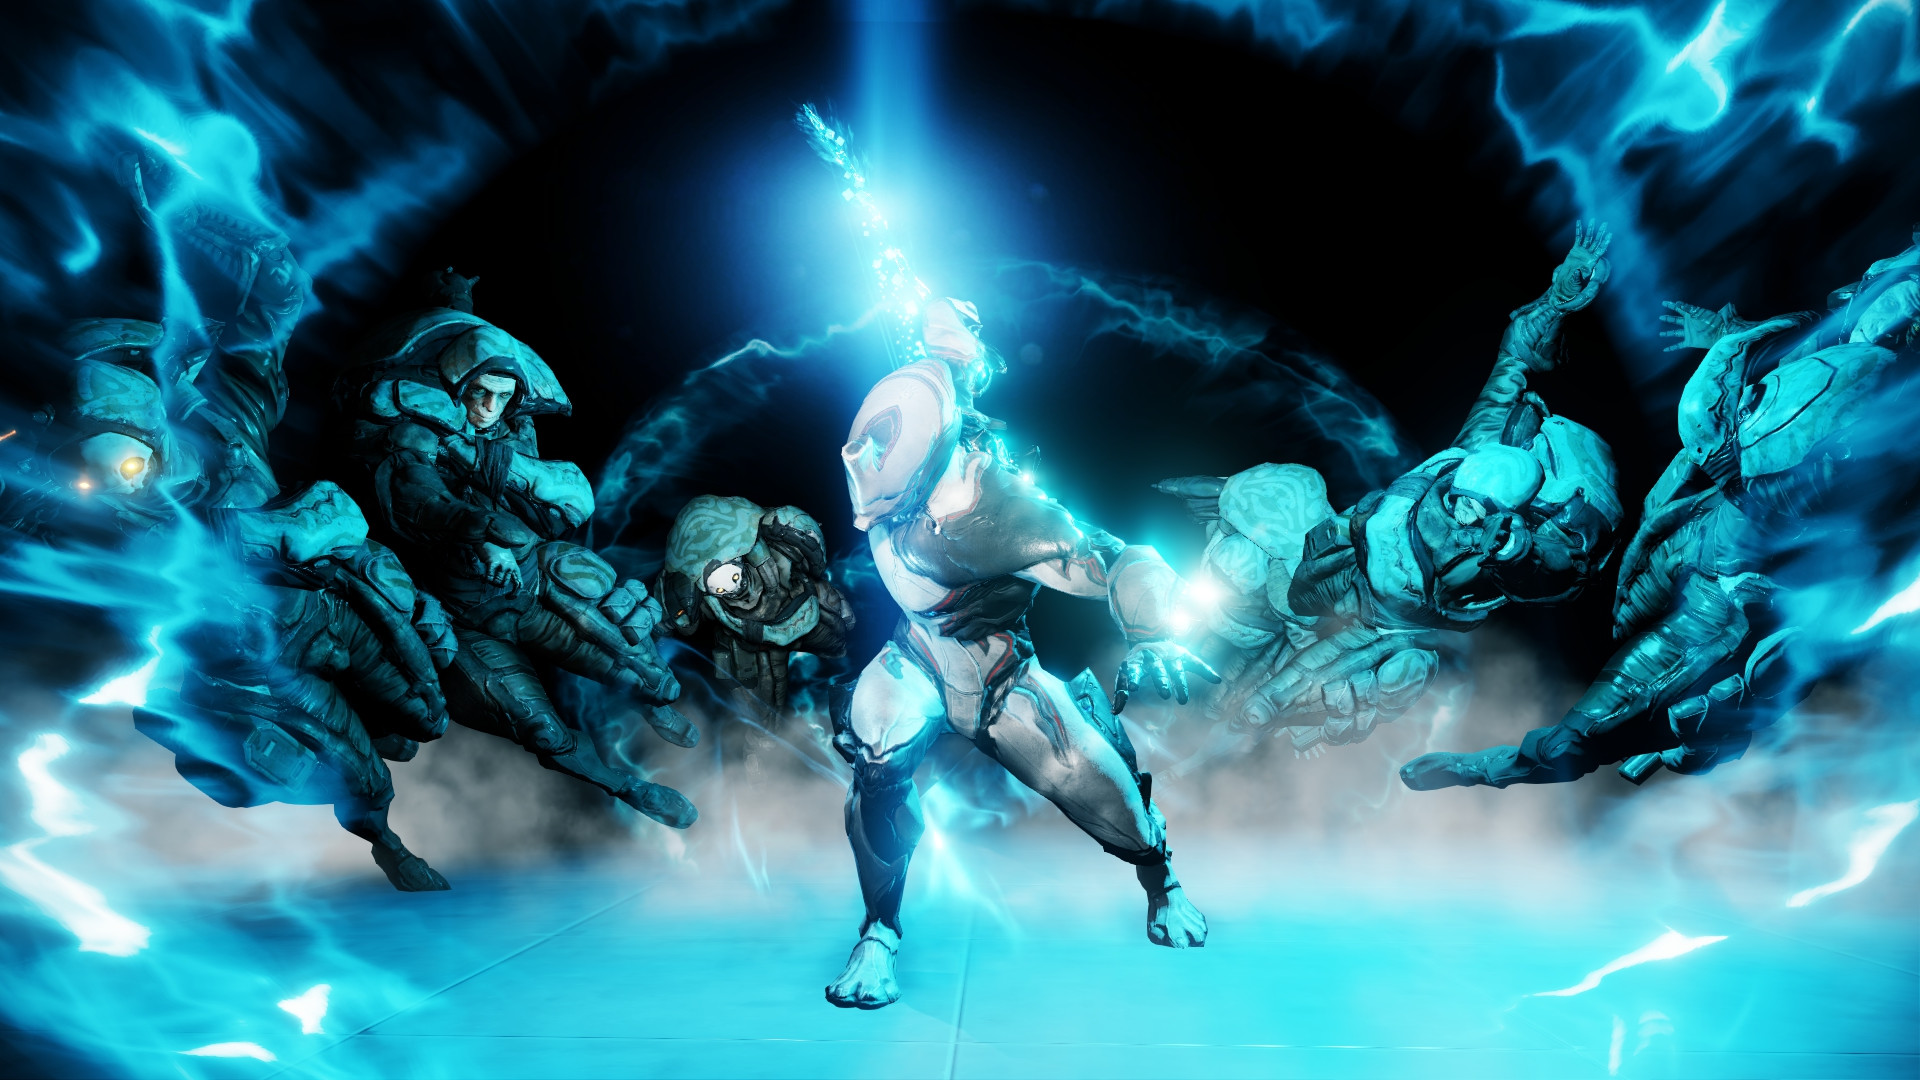 1920x1080 Abilities are special skills that all Warframes possess, whose abilities  allow them to turn the tide of battle. Every Warframe has a set of four  select ...